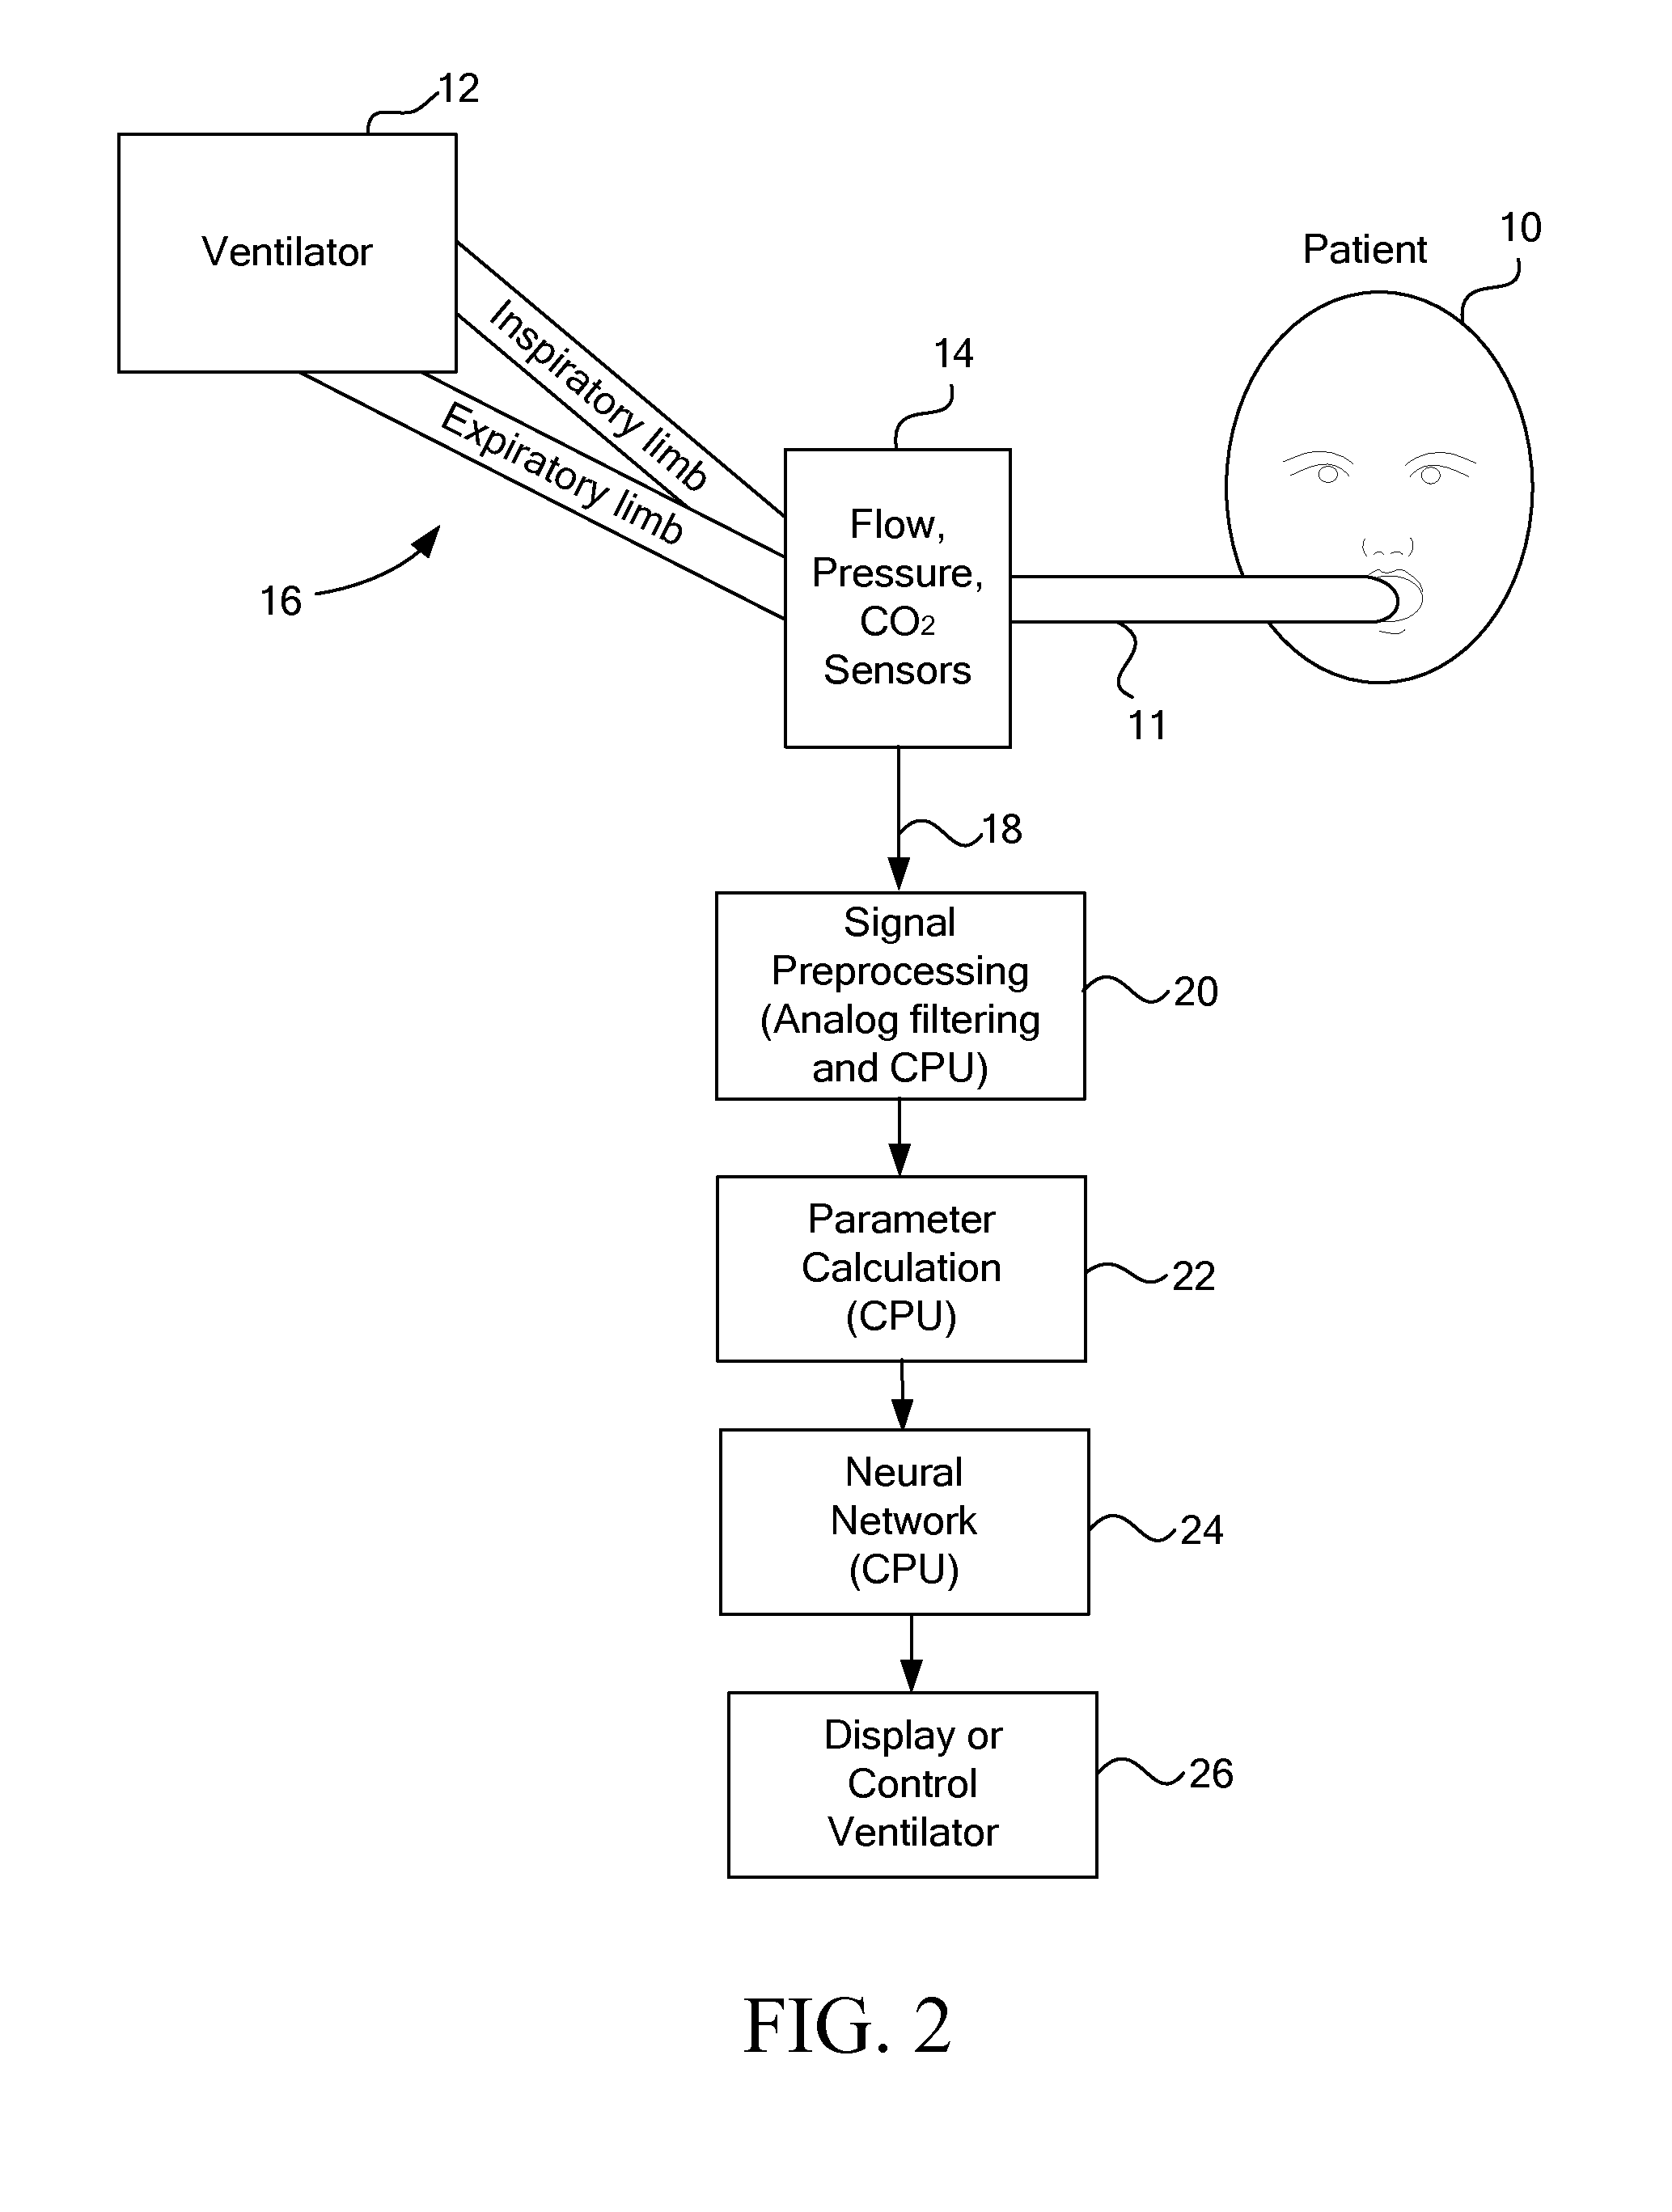 Method and Apparatus for Predicting Work of Breathing